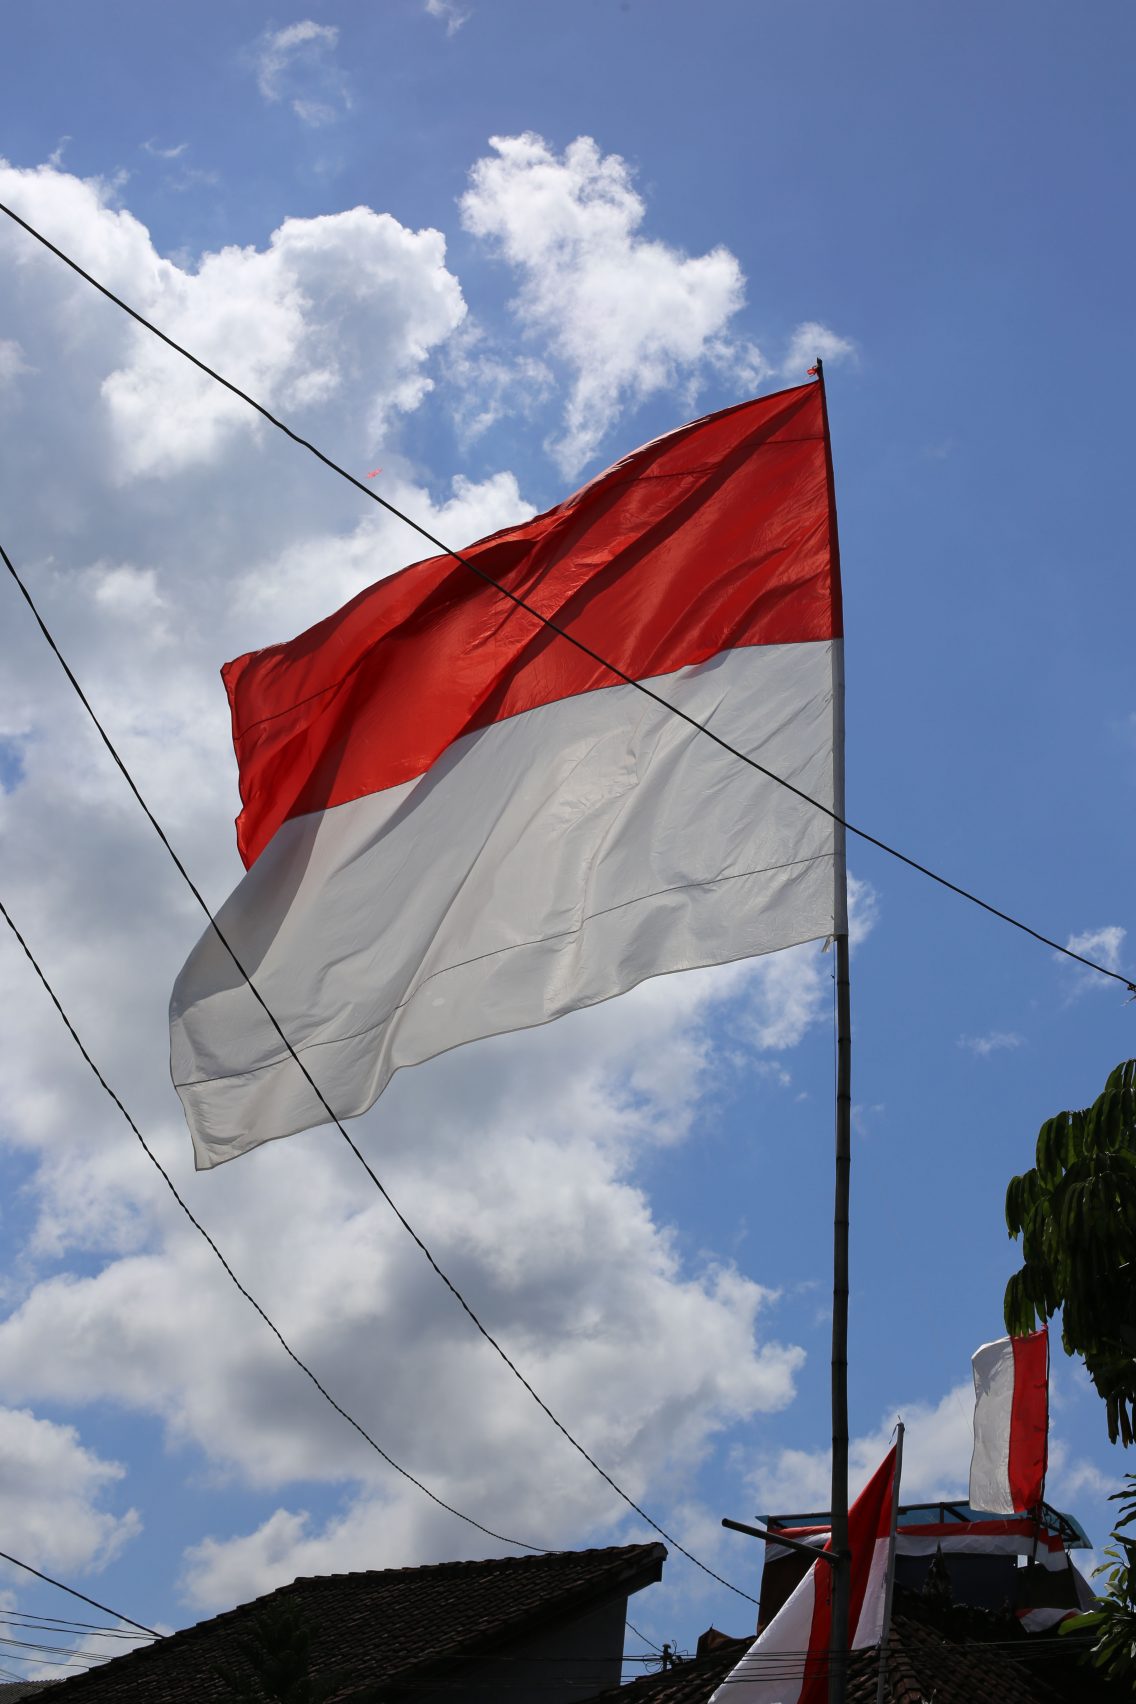 The Indonesian flag